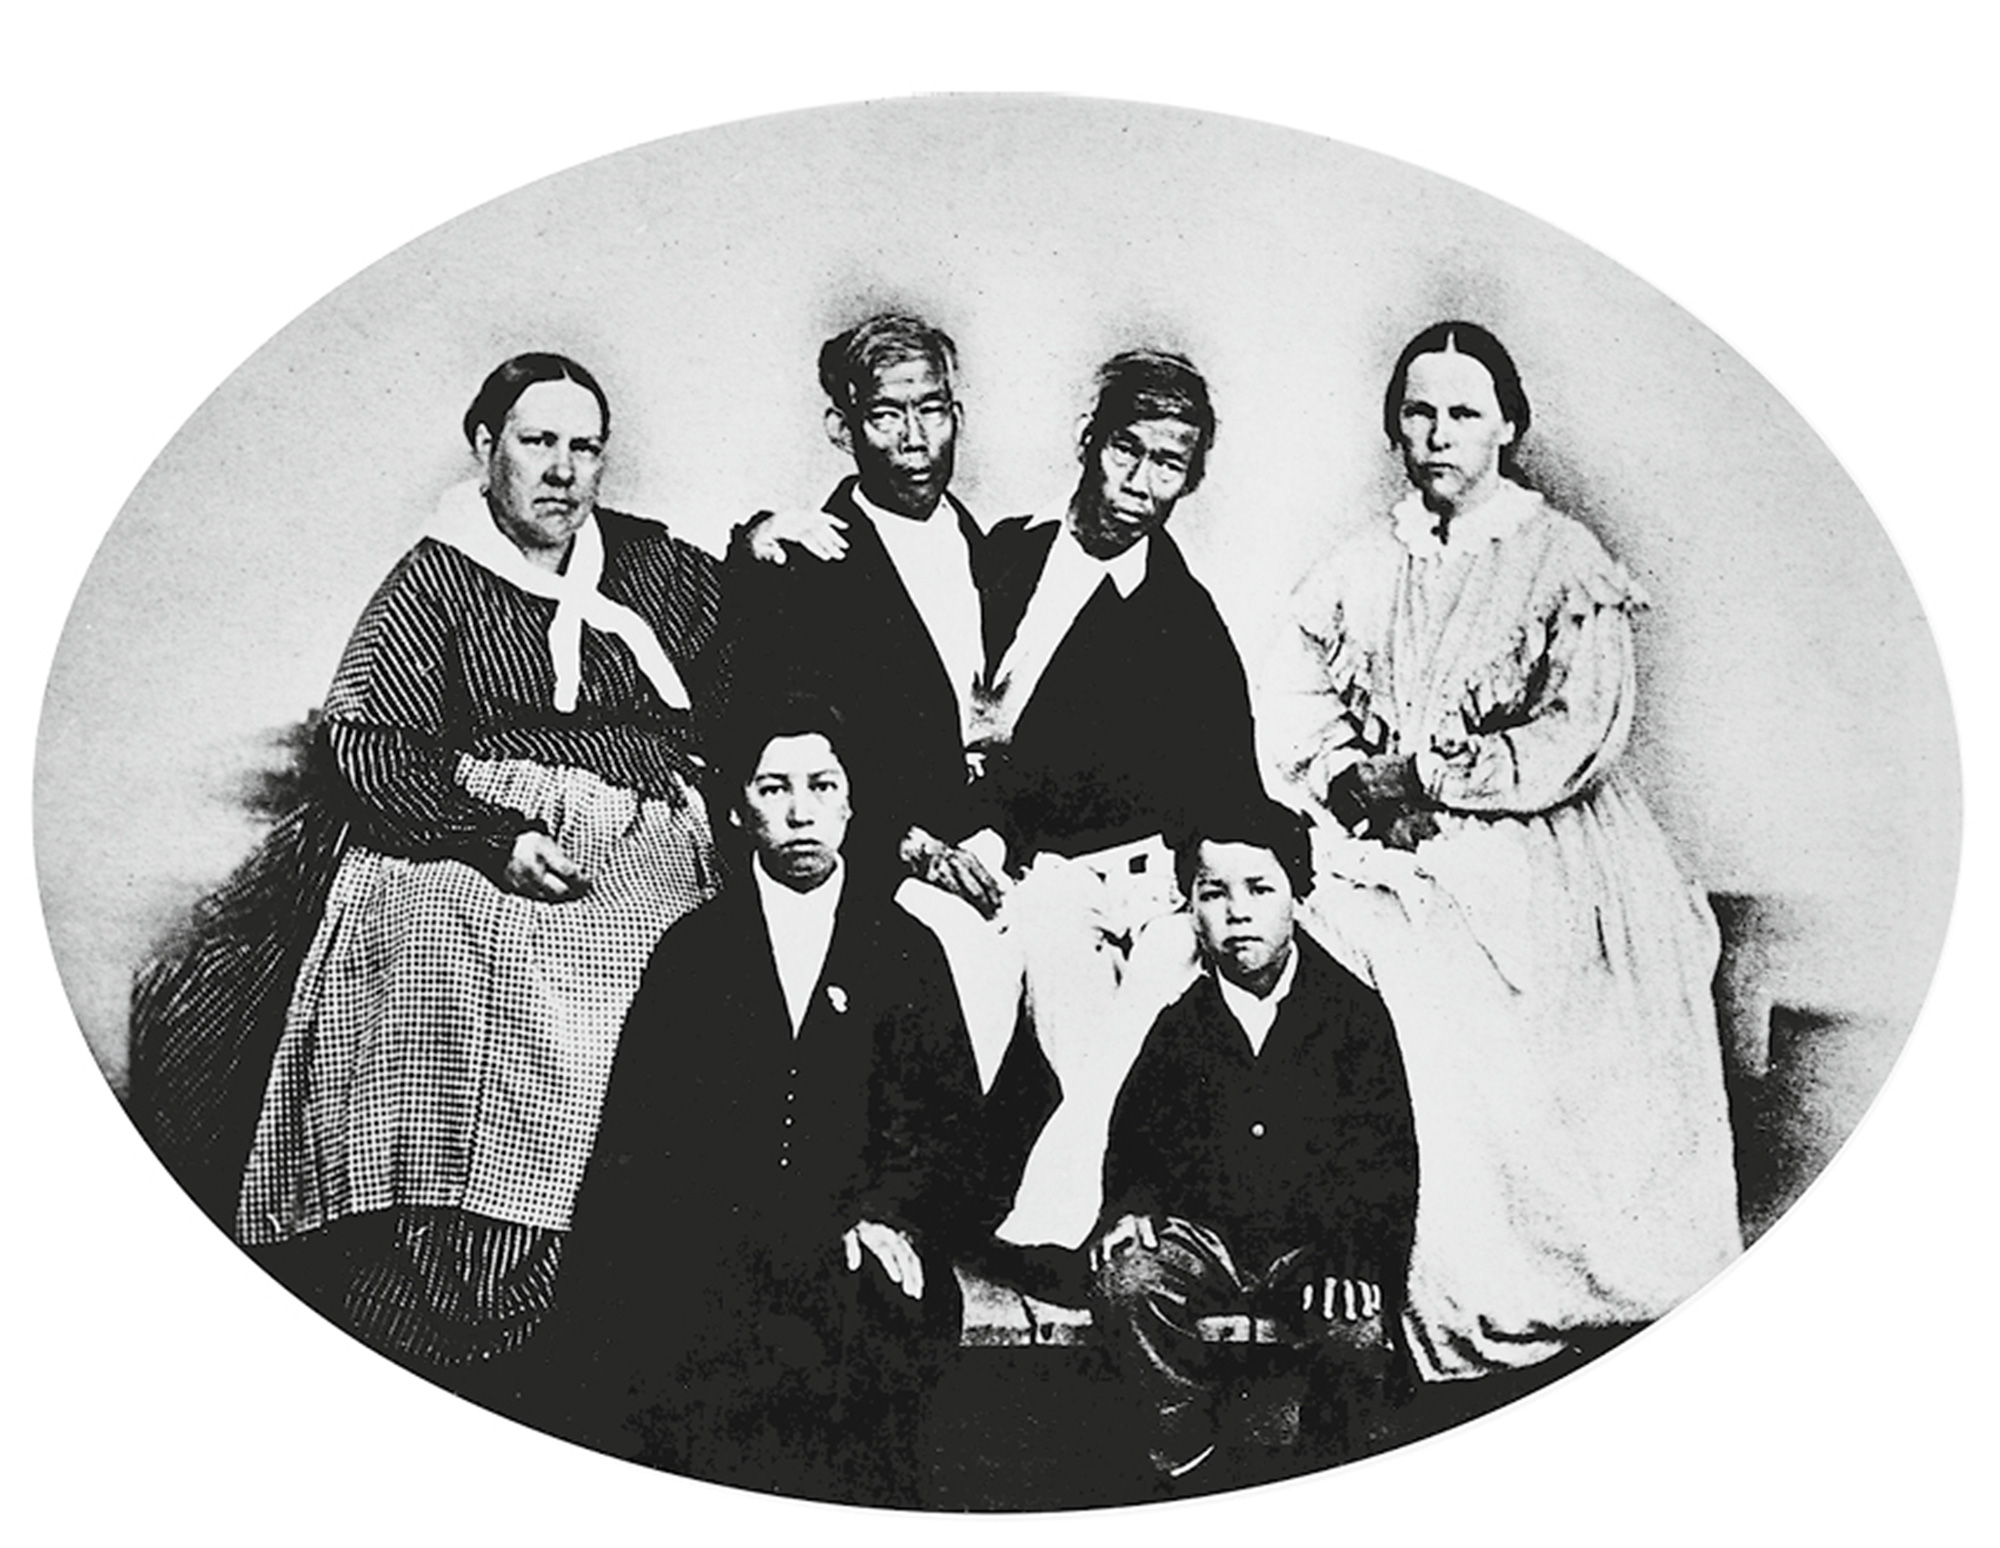 A circa eighteen sixty-five photograph of the conjoined twins Chang and Eng Bunker, surrounded by their wives and two of their sons.